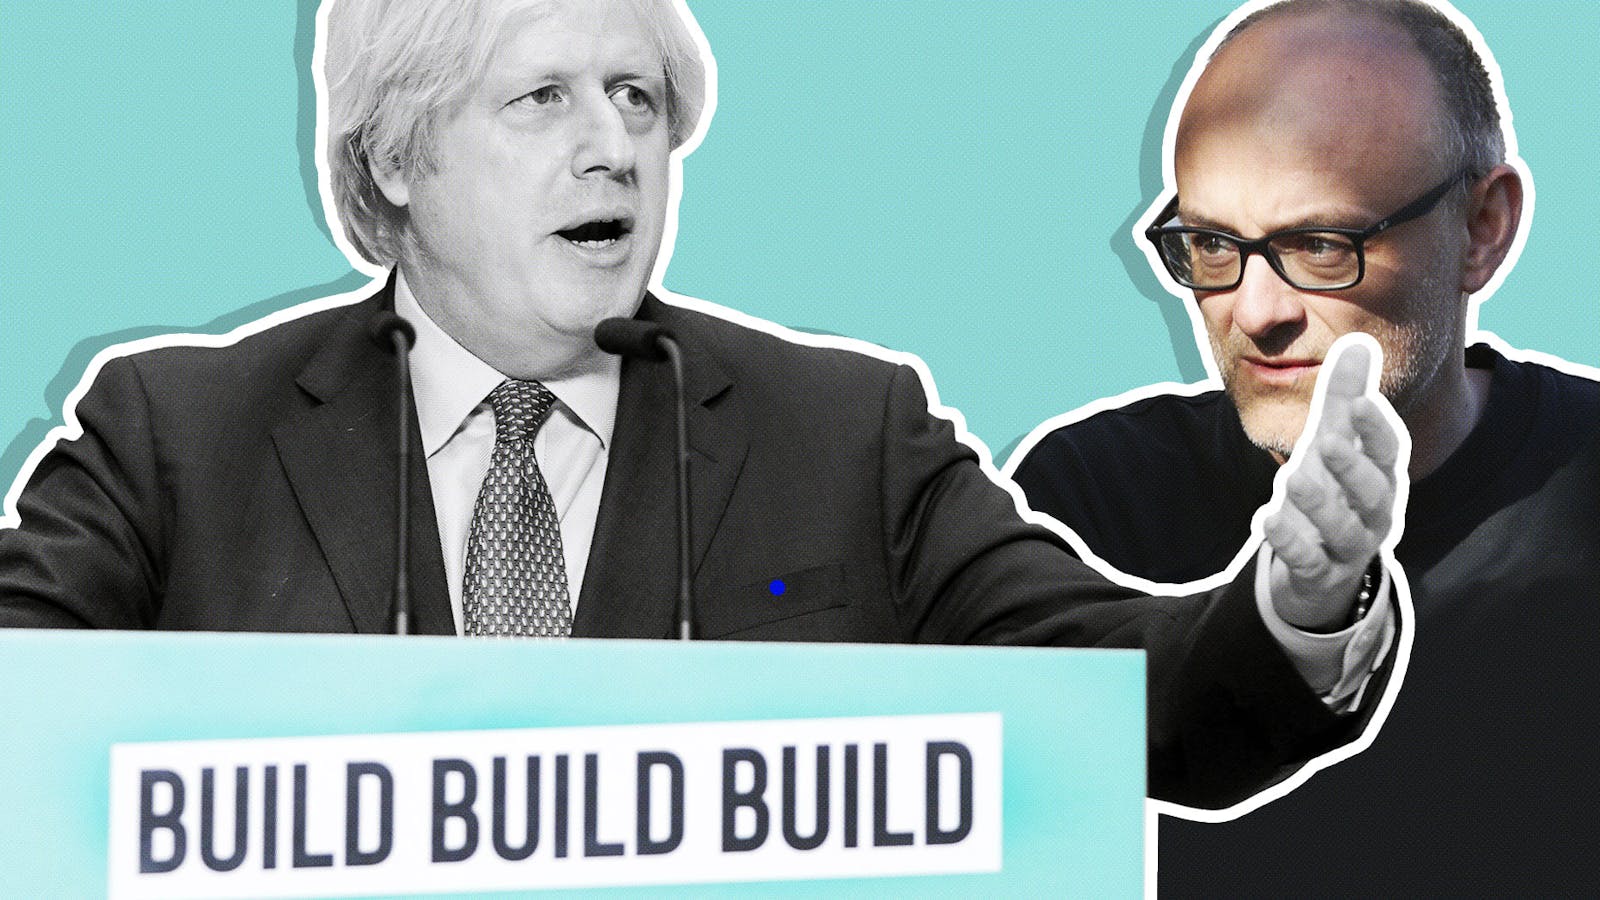 Boris Johnson (left) and Dominic Cummings. Photo of Johnson by Andrew Parsons/Flickr; photo of Cummings by Bloomberg